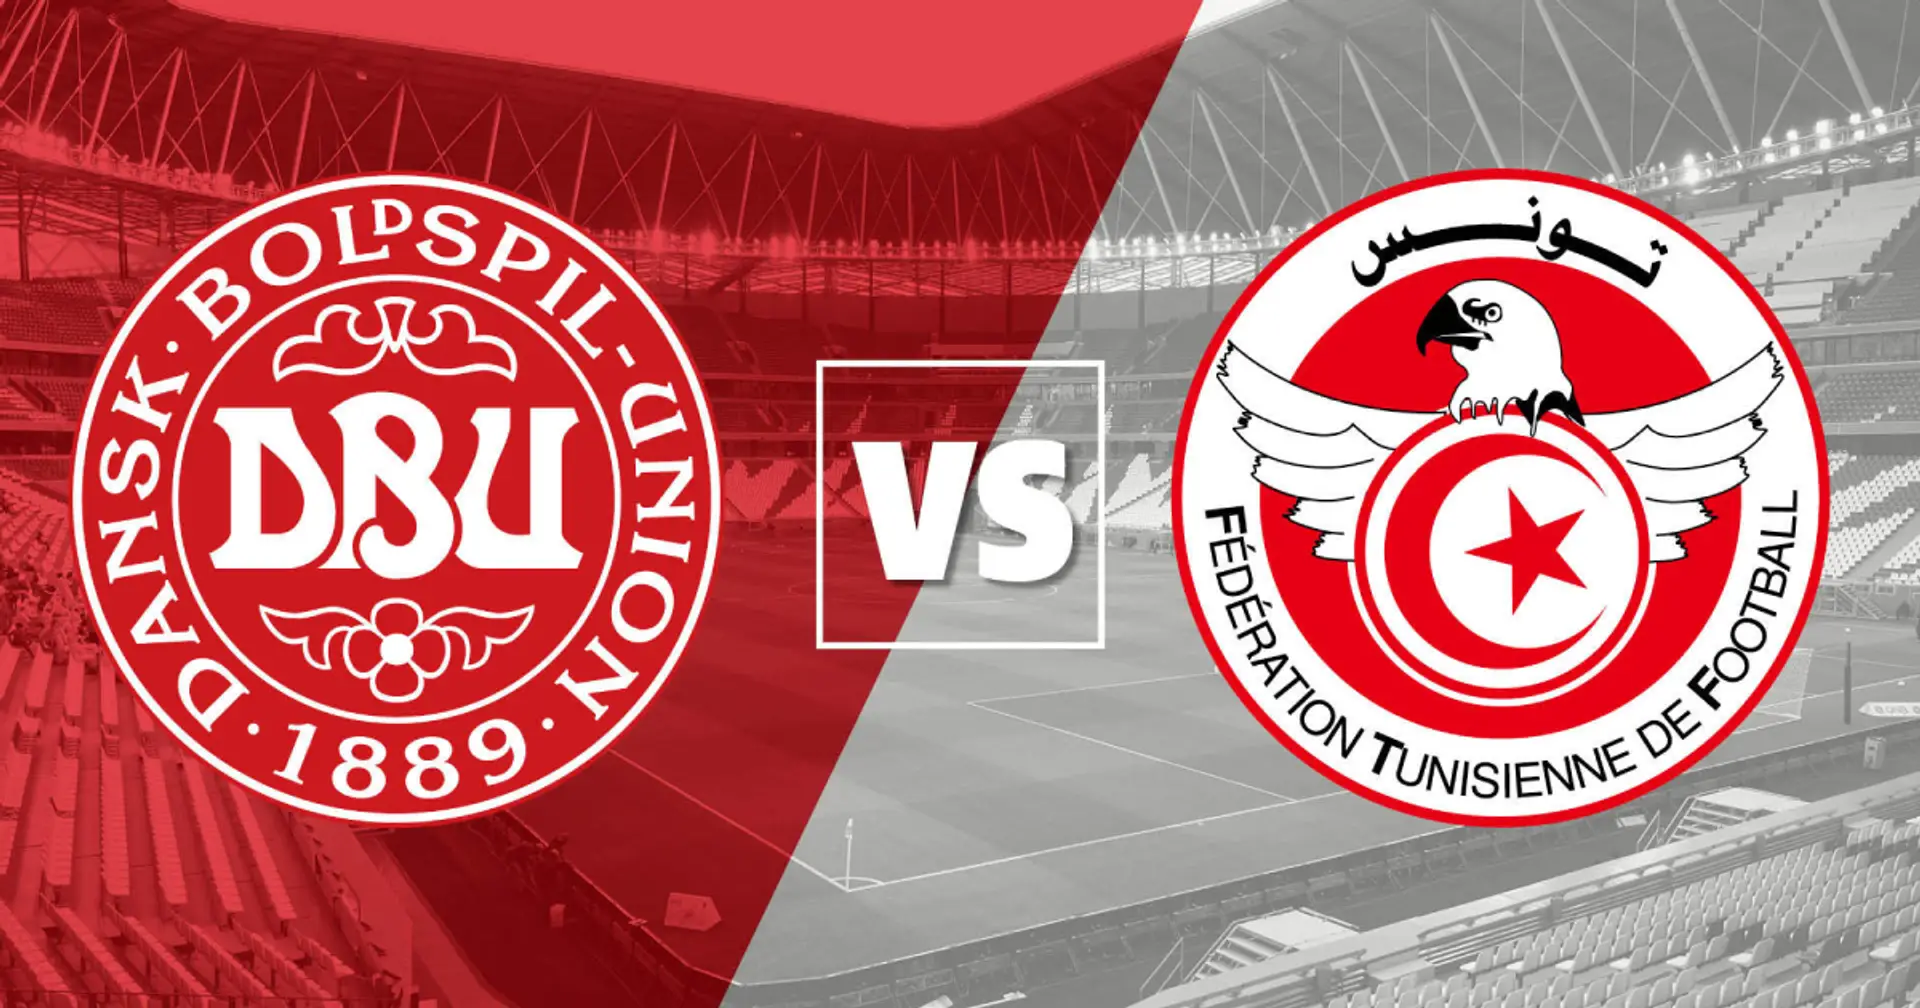 Denmark vs Tunisia: Official team lineups for the World Cup clash revealed